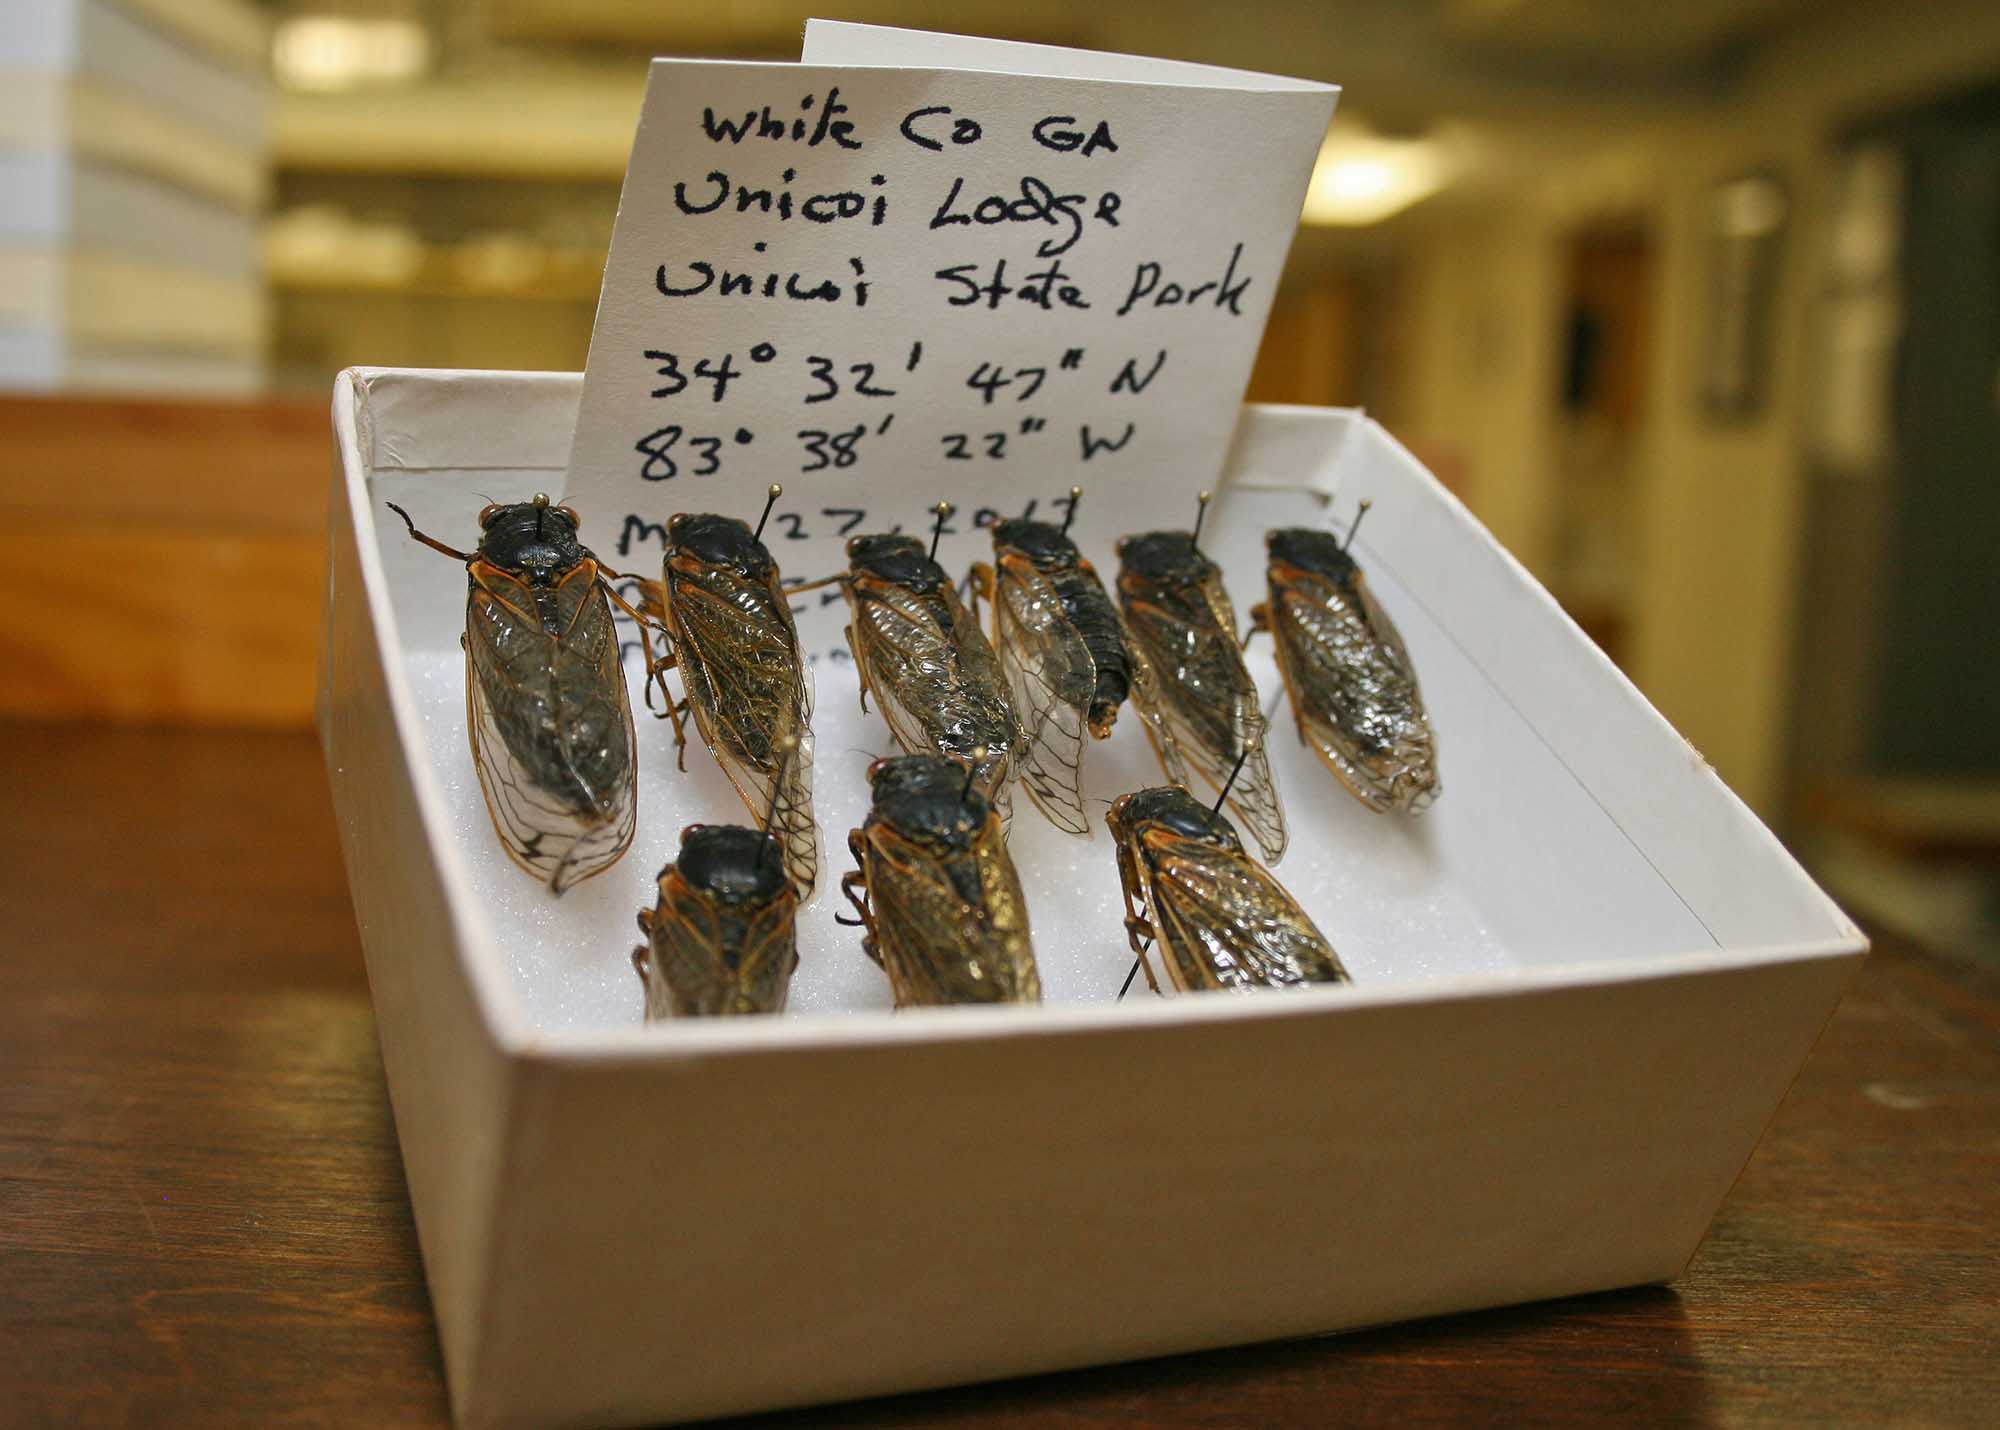 Dac Crossley, emeritus curator of mites for the Georgia Museum of Natural History, collected the first of the museum's Georgia-grown Brood II cicadas over Memorial Day weekend in White County. The museum's curators are asking the public to send any intact cicada carcasses they find to help study the Brood II emergence in Georgia. (Credit: J. Merritt Melancon/UGA)